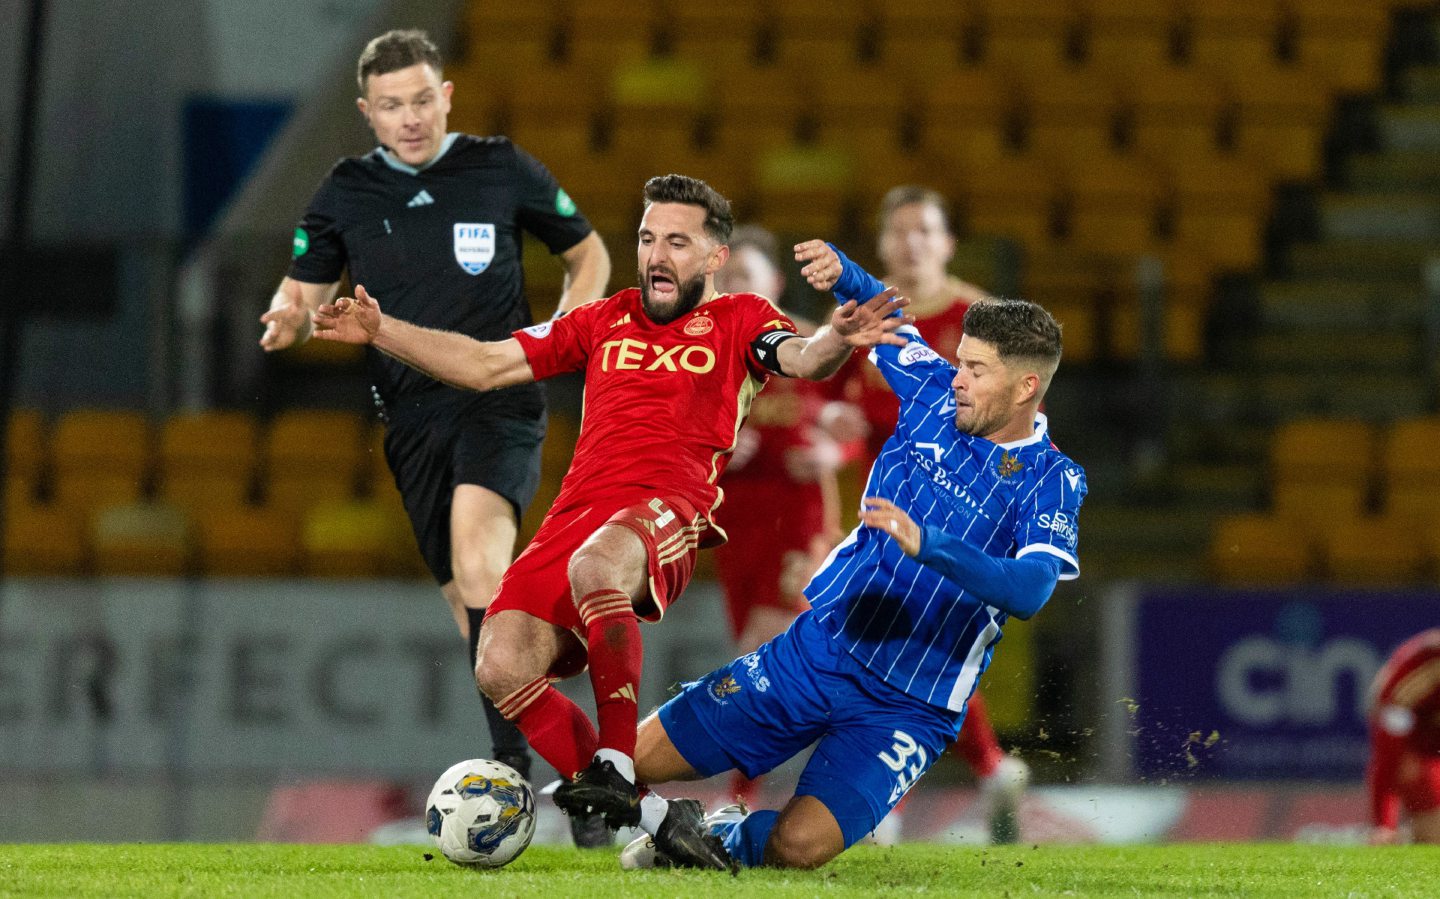  St Johnstone's David Keltjens fouls Aberdeen's Graeme Shinnie during a 1-1 draw in Perth. Image: SNS 